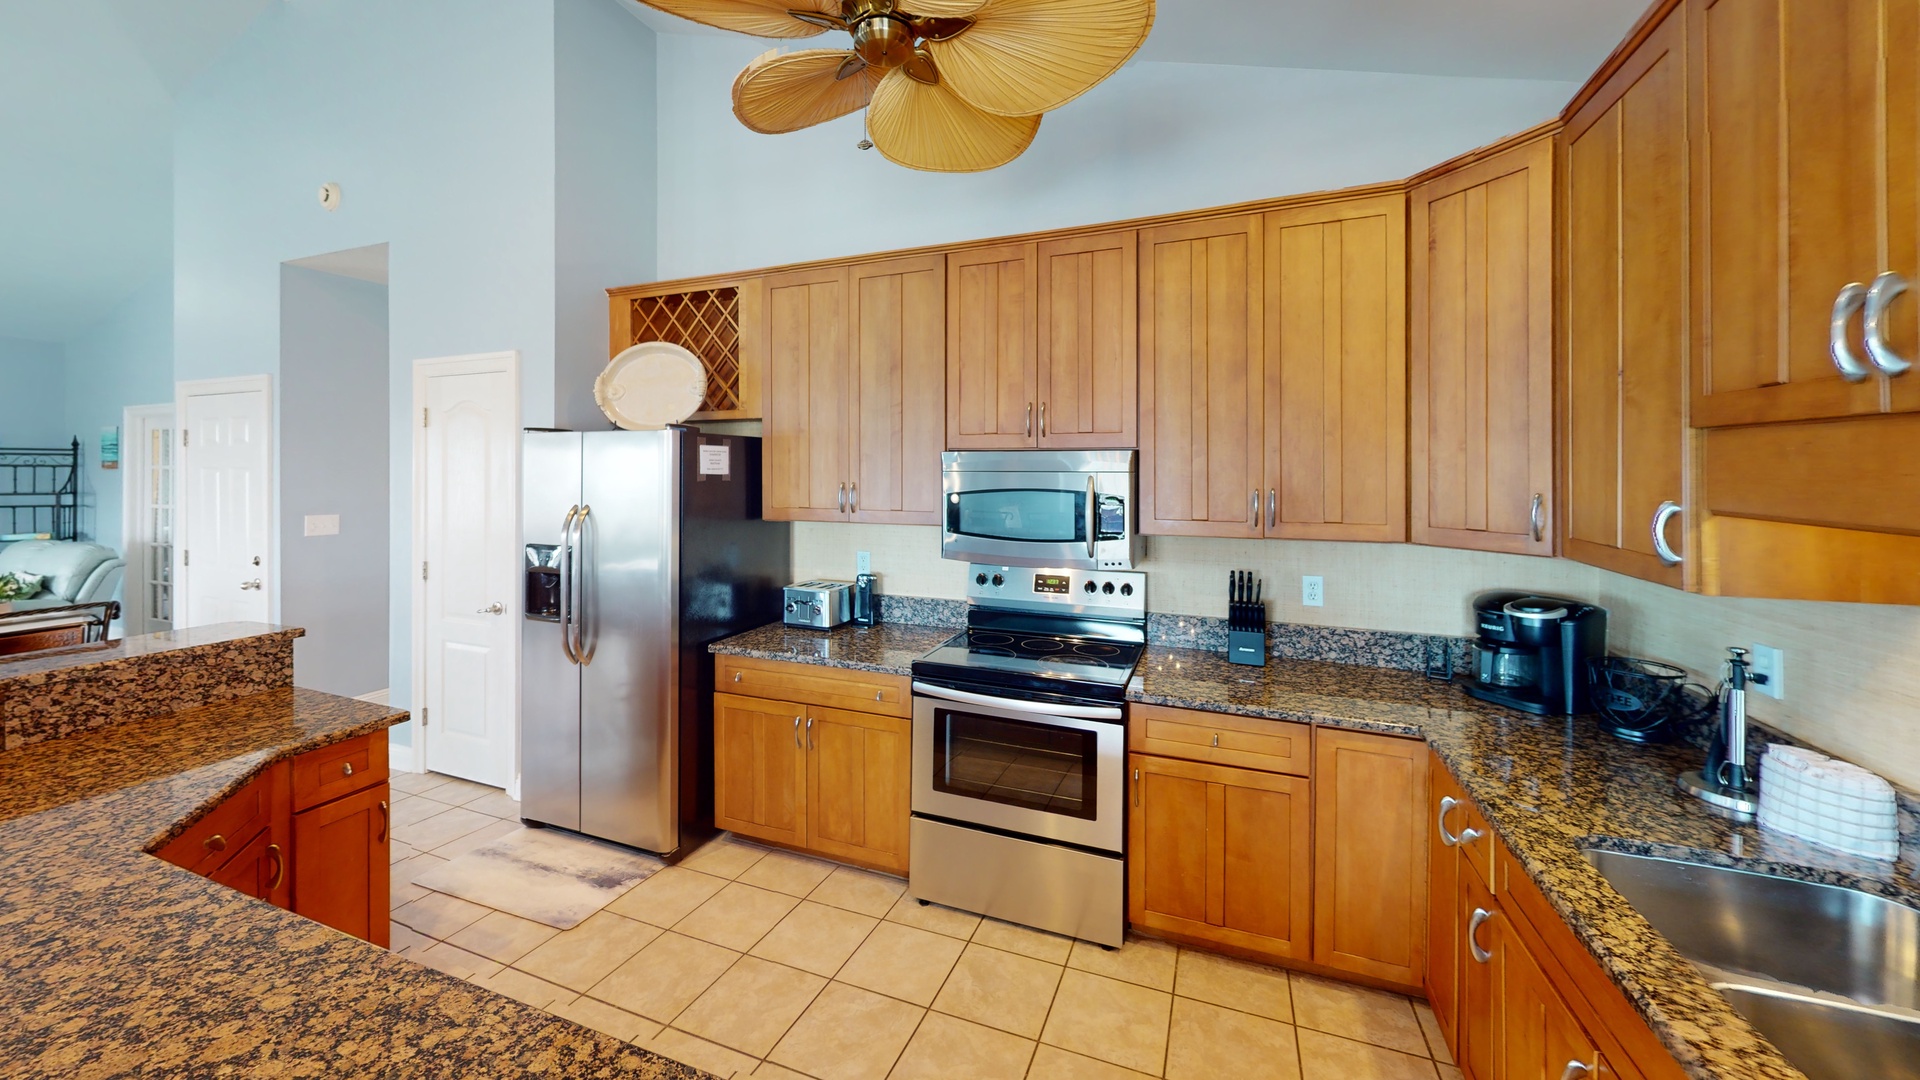 Stainless appliances and granite countertops